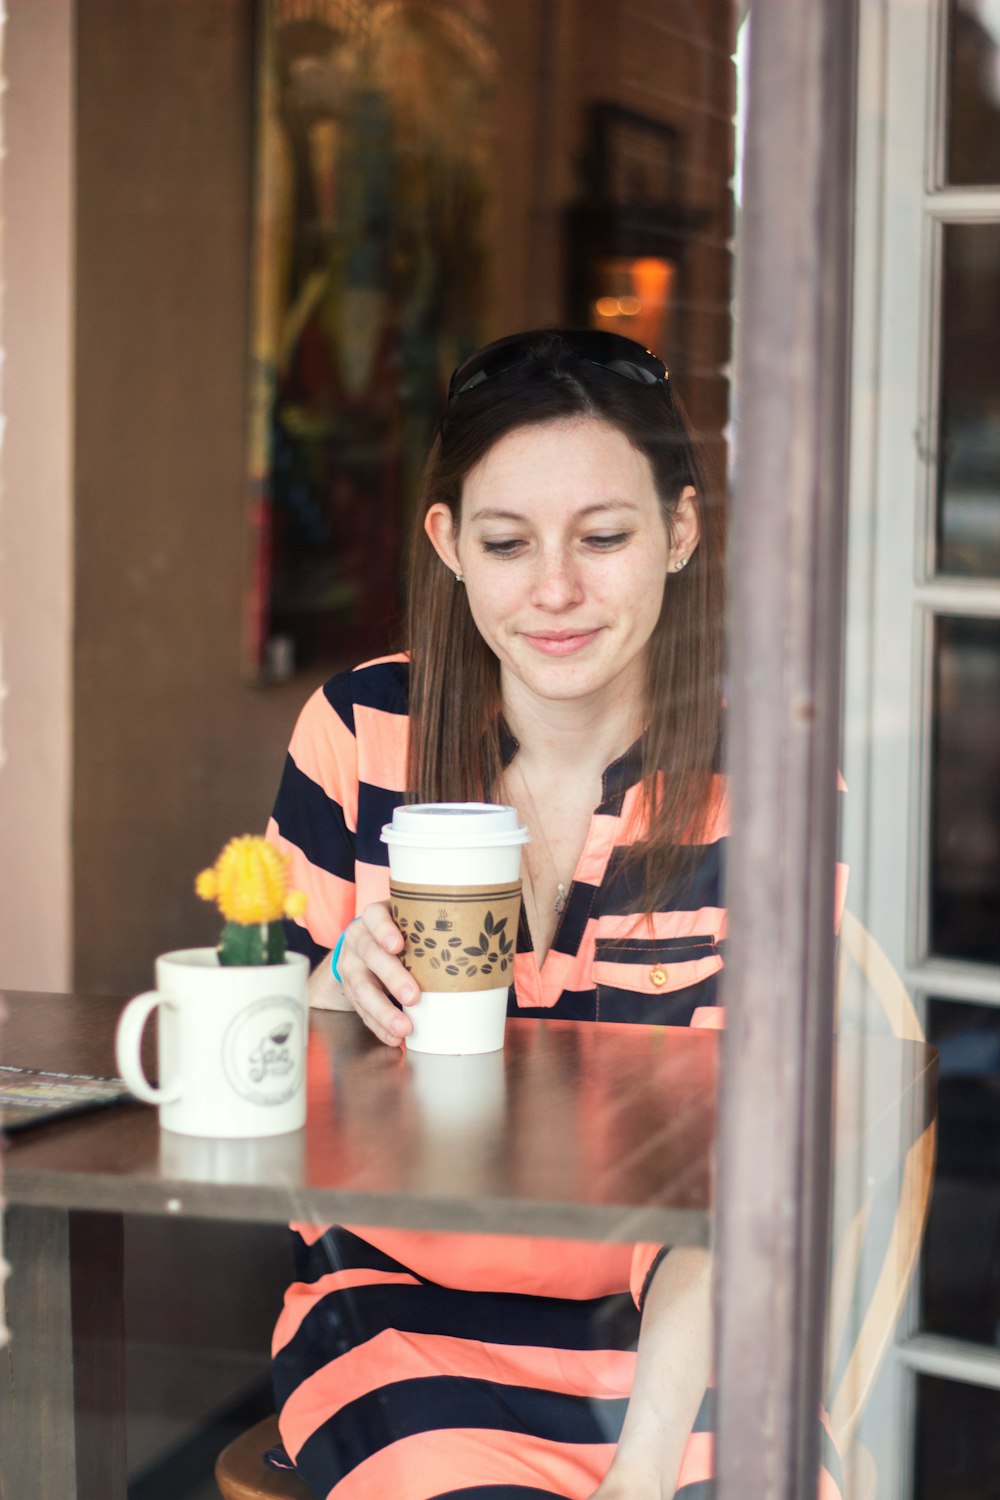 woman sitting down at table looking at cup in hand